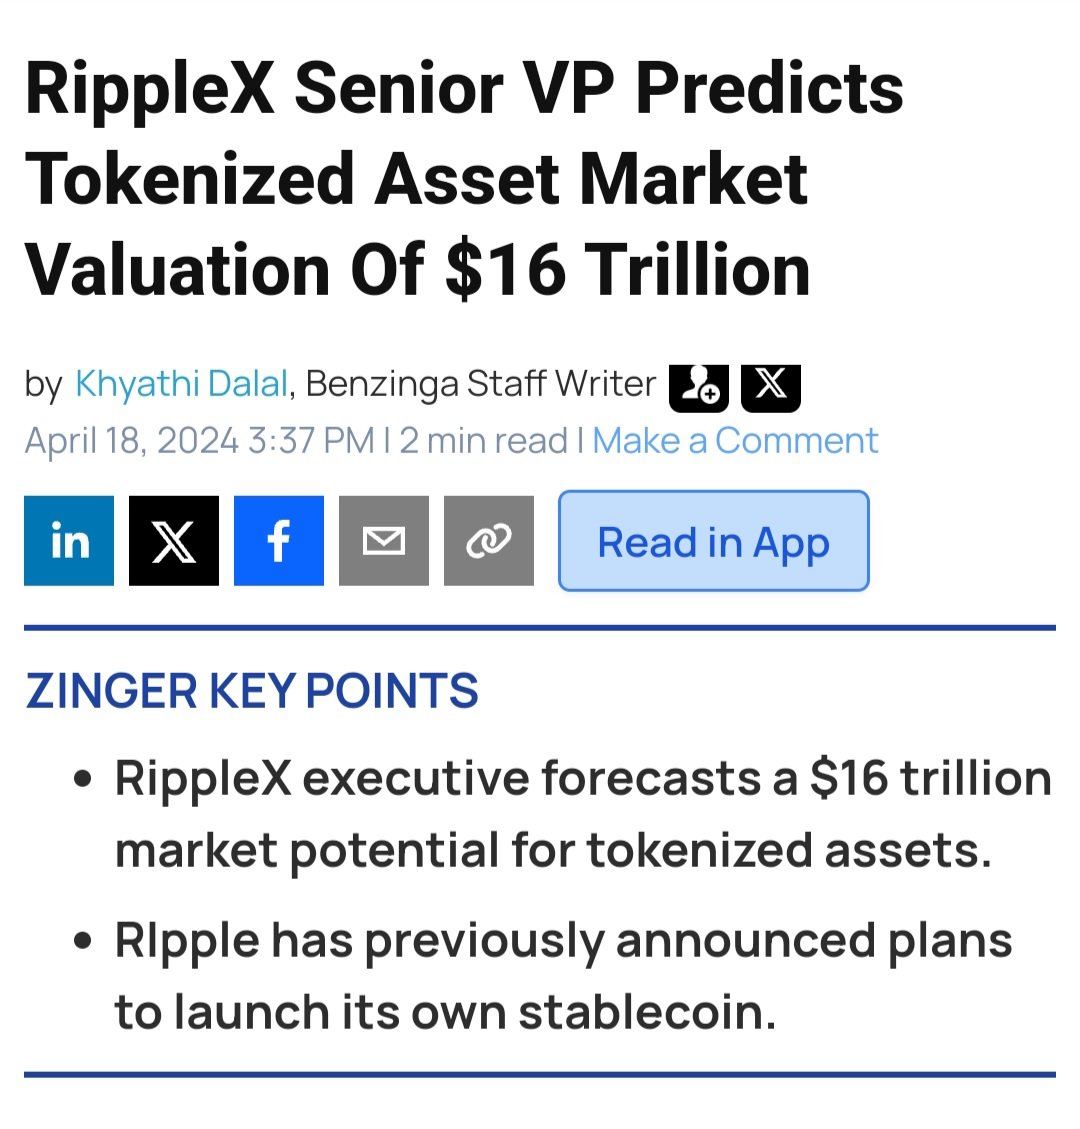 Excited to be at the forefront of the changes in our #financial system The #technologies we're #investing in today are the foundation of the new monetary system, granting us ownership to a portion of the world's #wealth 2 years saying it, and now it's confirmed #XRP #Stablecoin